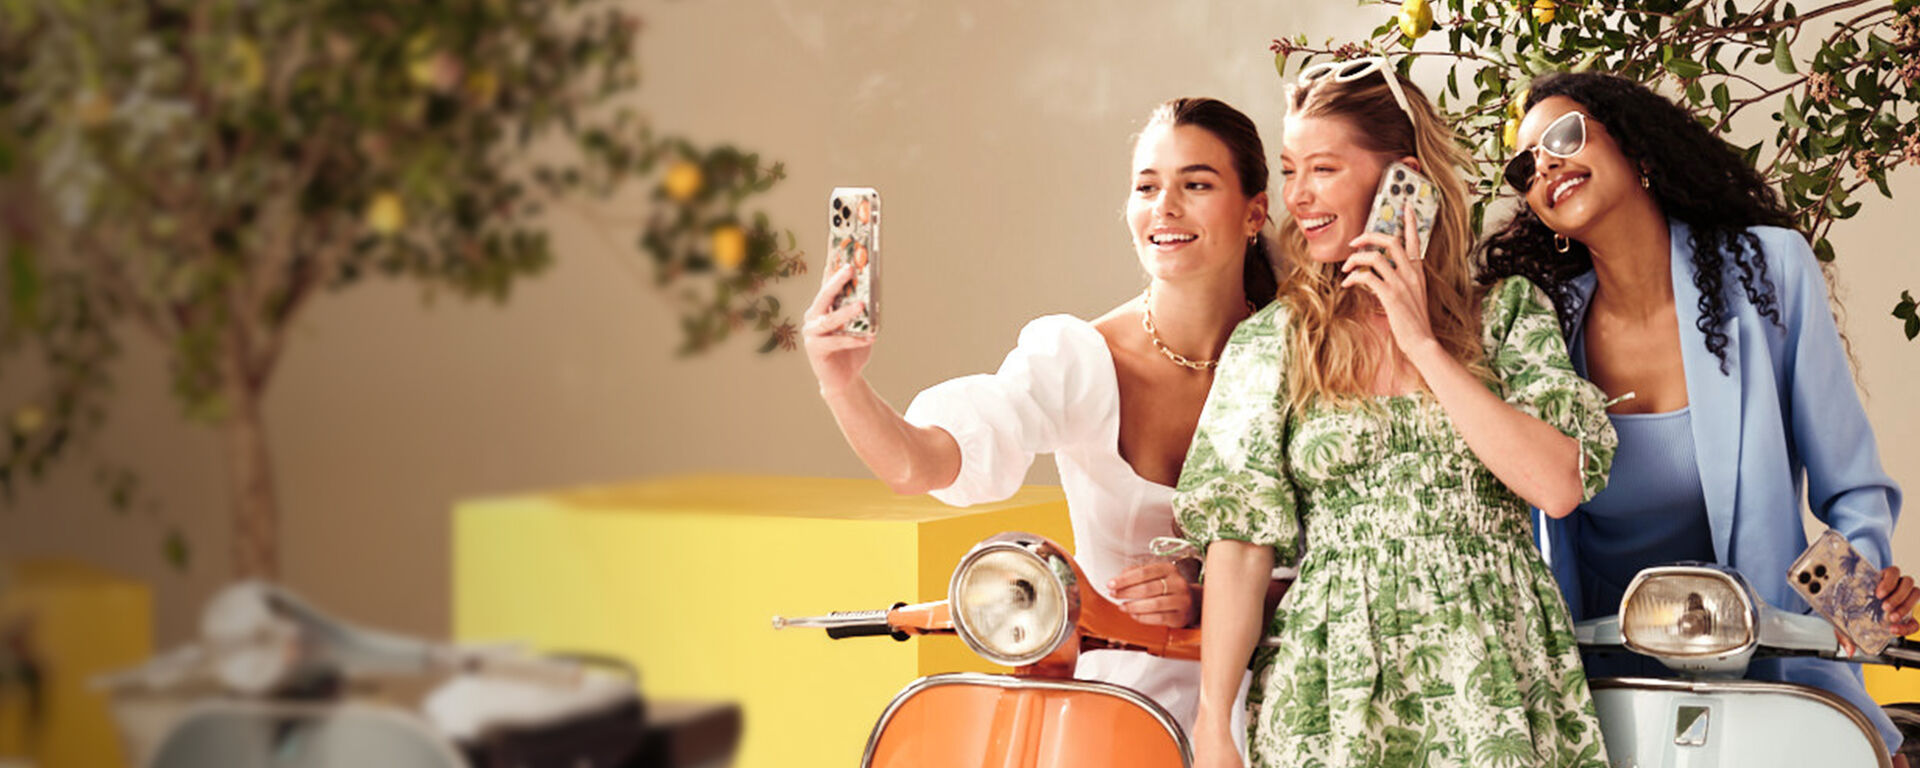 3 Girls on vespas with cute summer phone cases | OtterBox